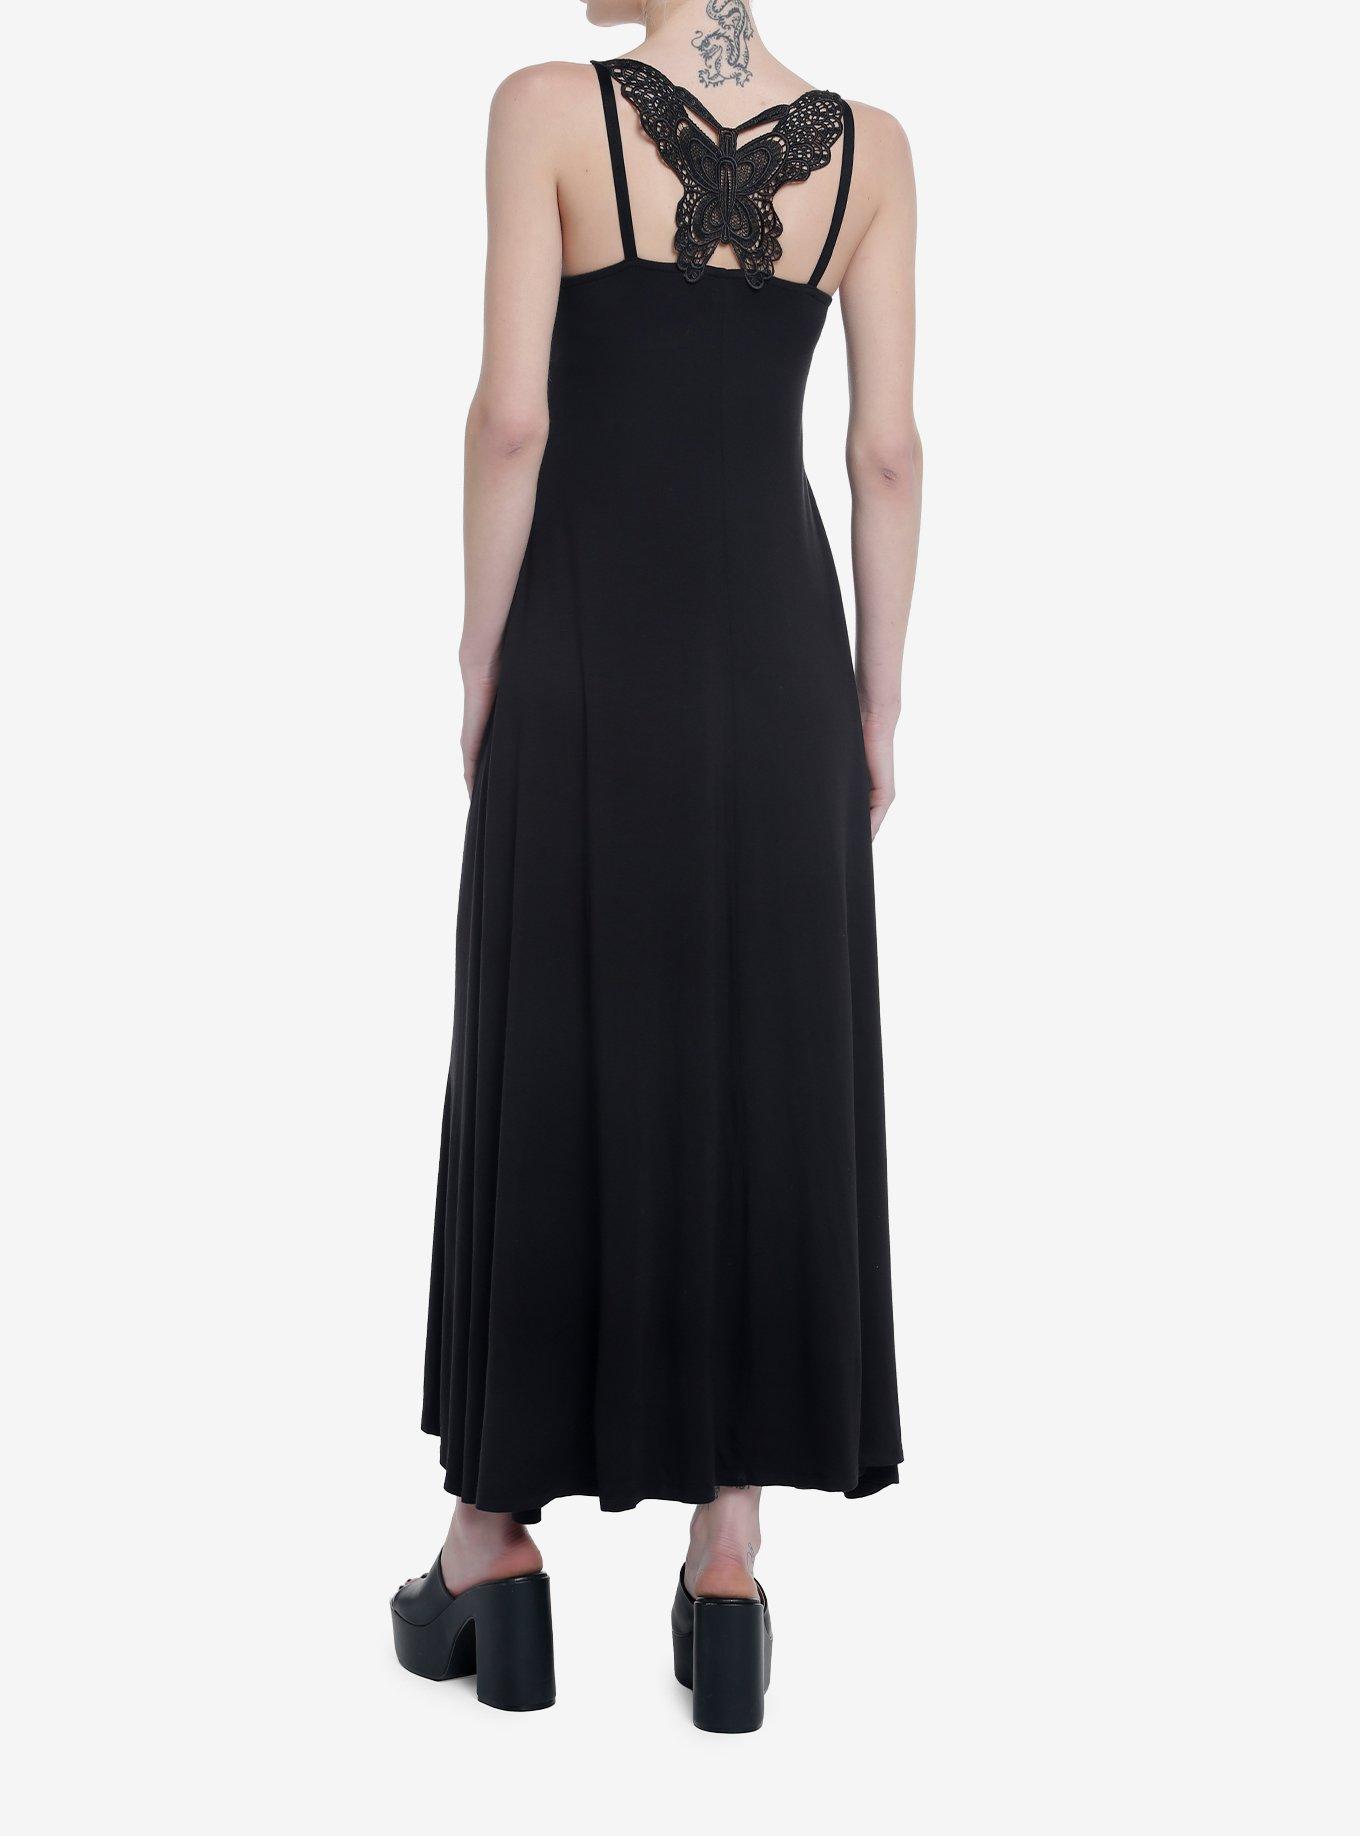 Thorn & Fable Black Lace Butterfly Maxi Dress, BLACK, hi-res